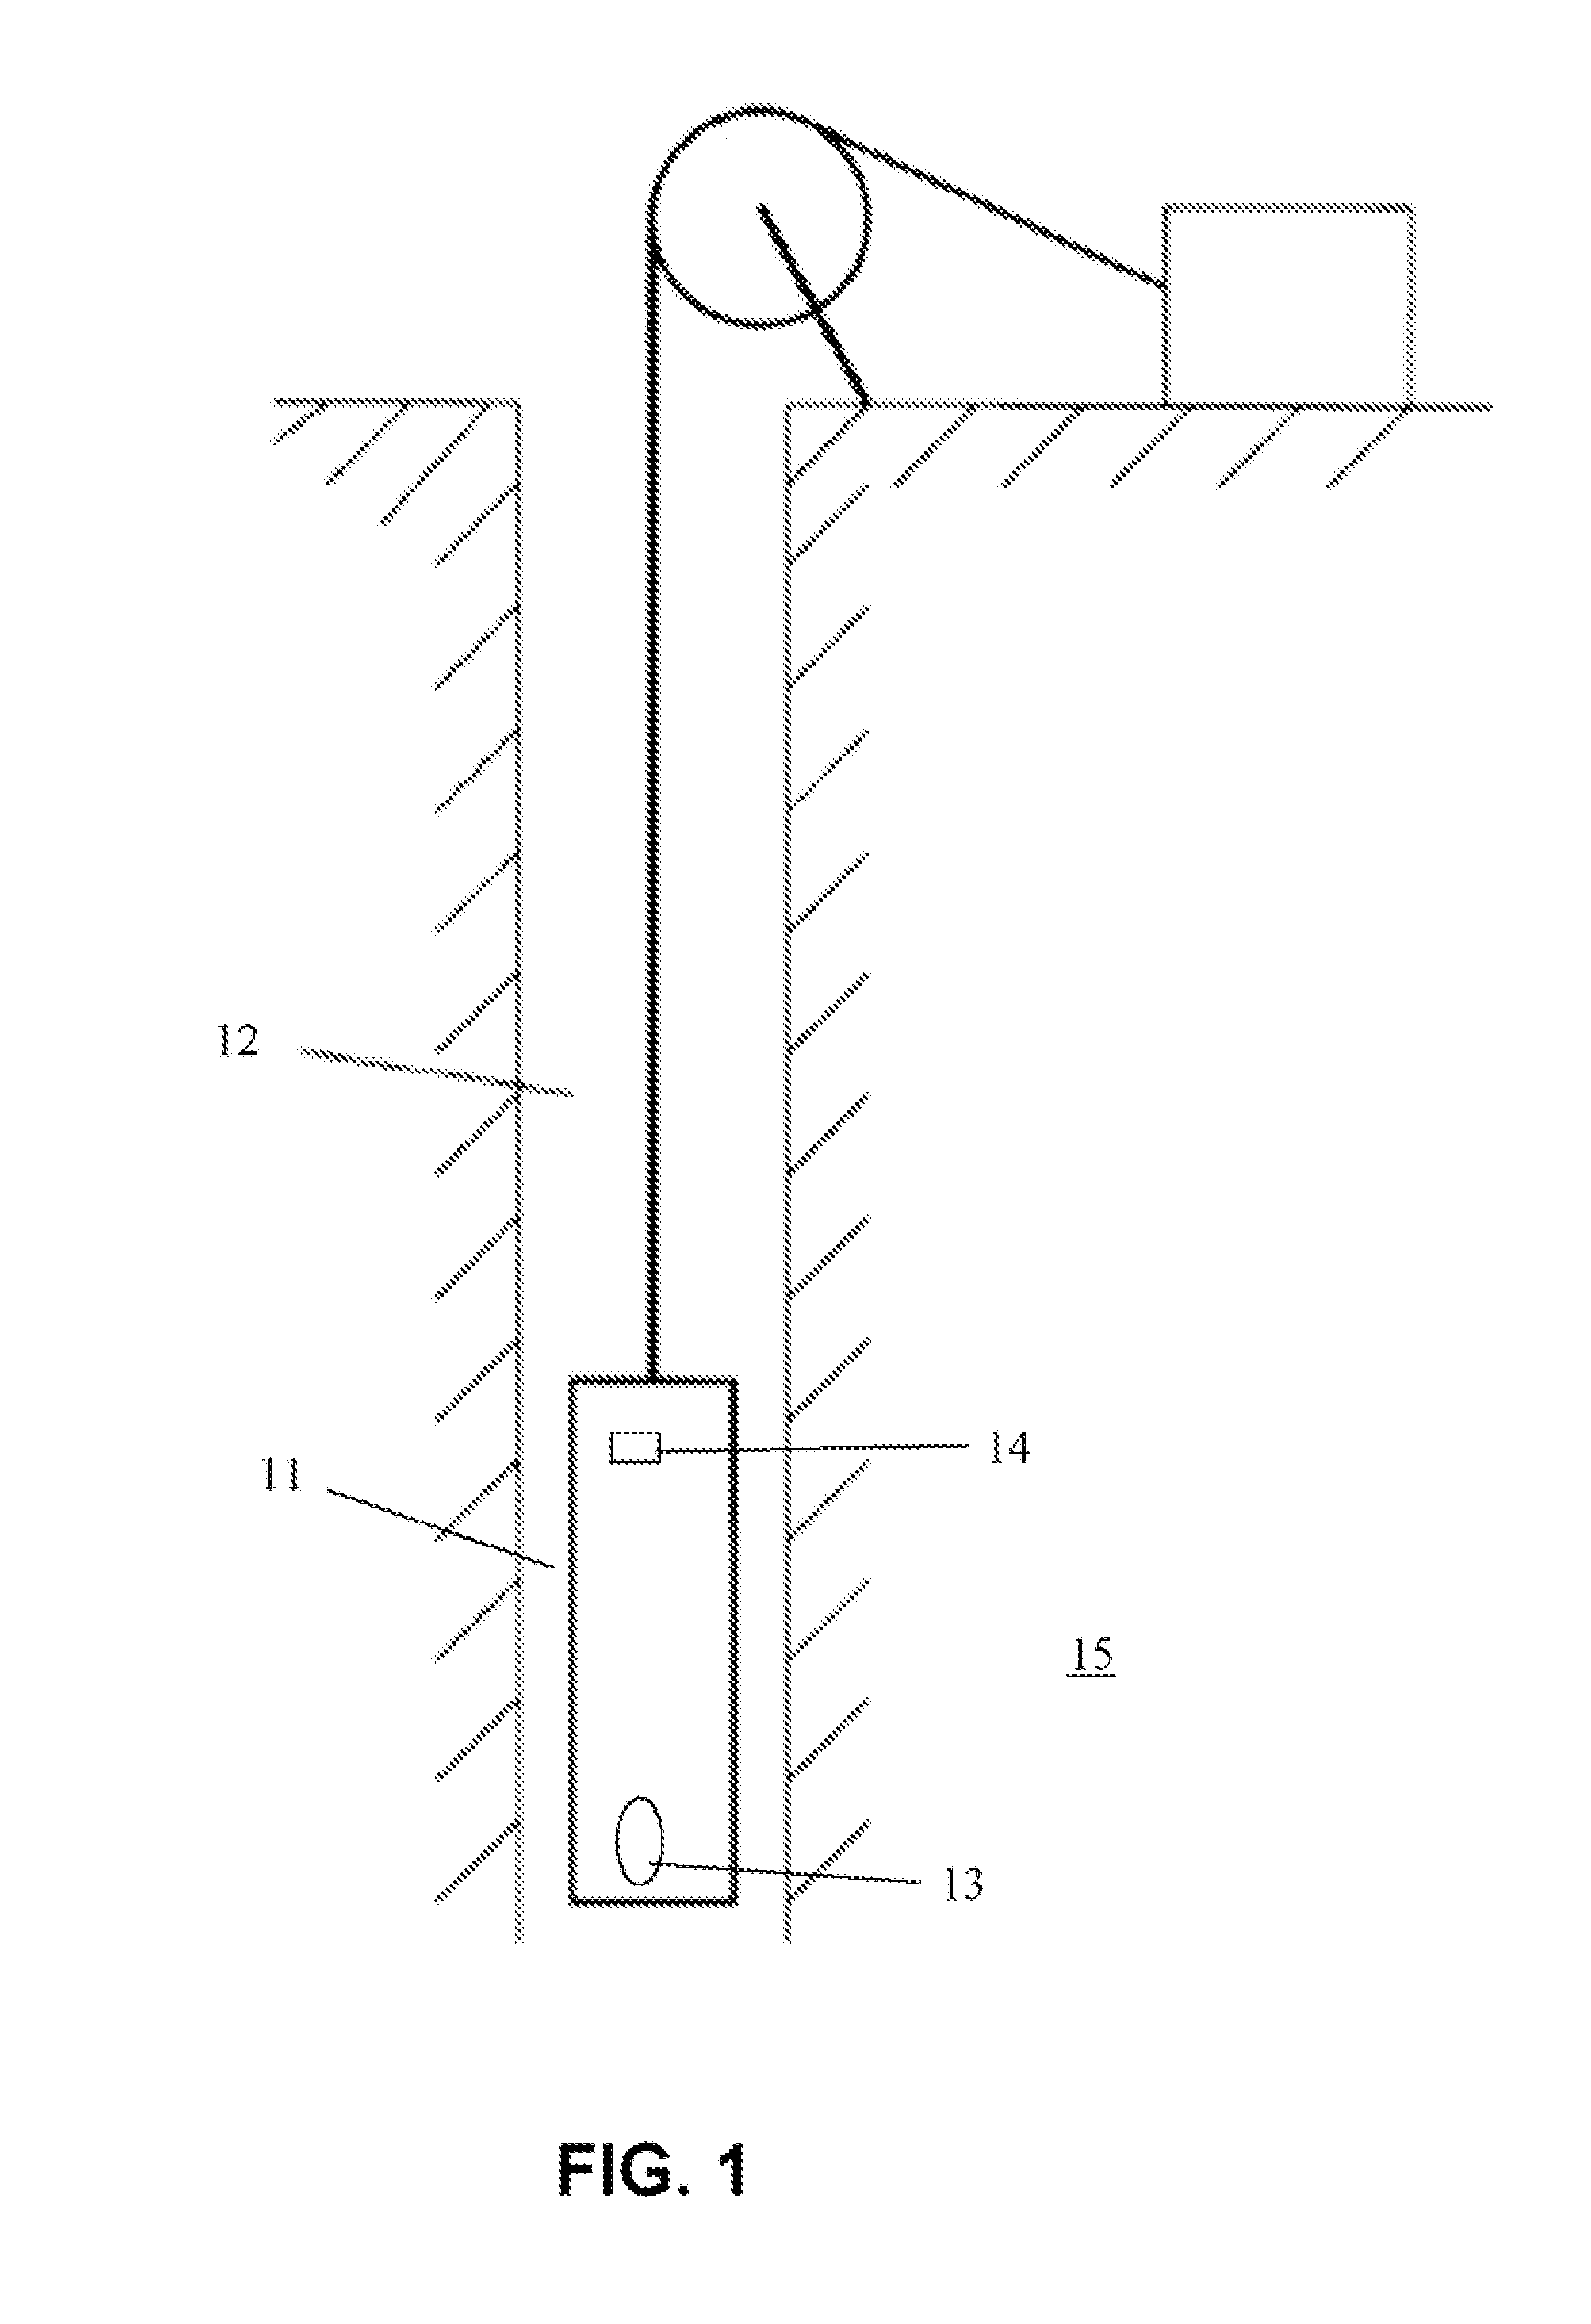 Thermal neutron porosity from neutron slowing-down length, formation thermal neutron capture cross section, and bulk density